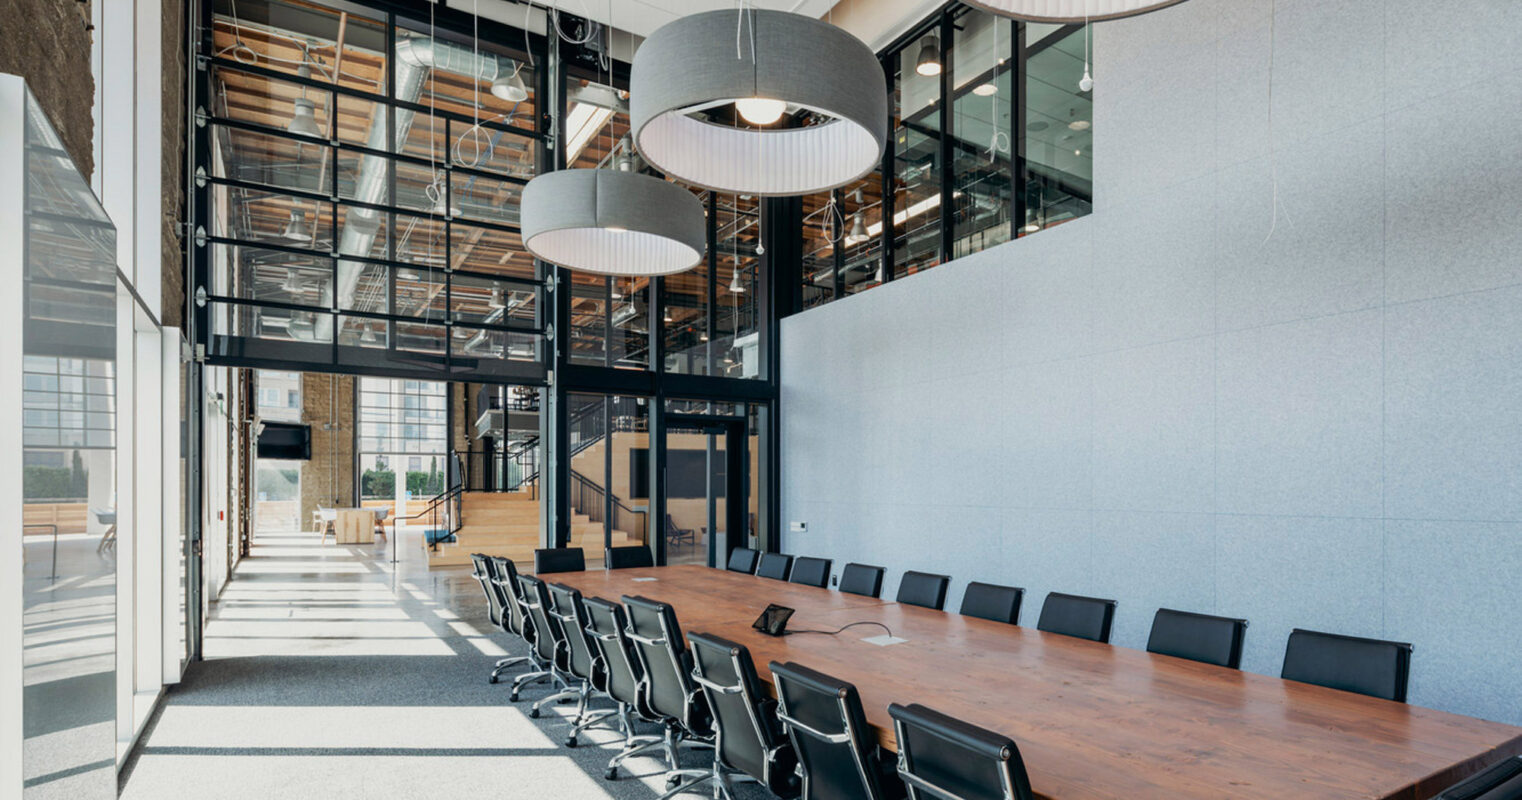 Modern conference room featuring a long, dark wood table with black chairs, complemented by large, circular pendant lights. Expansive windows allow natural light to illuminate the minimalist decor and textured walls, enhancing the room's sleek, contemporary aesthetic.